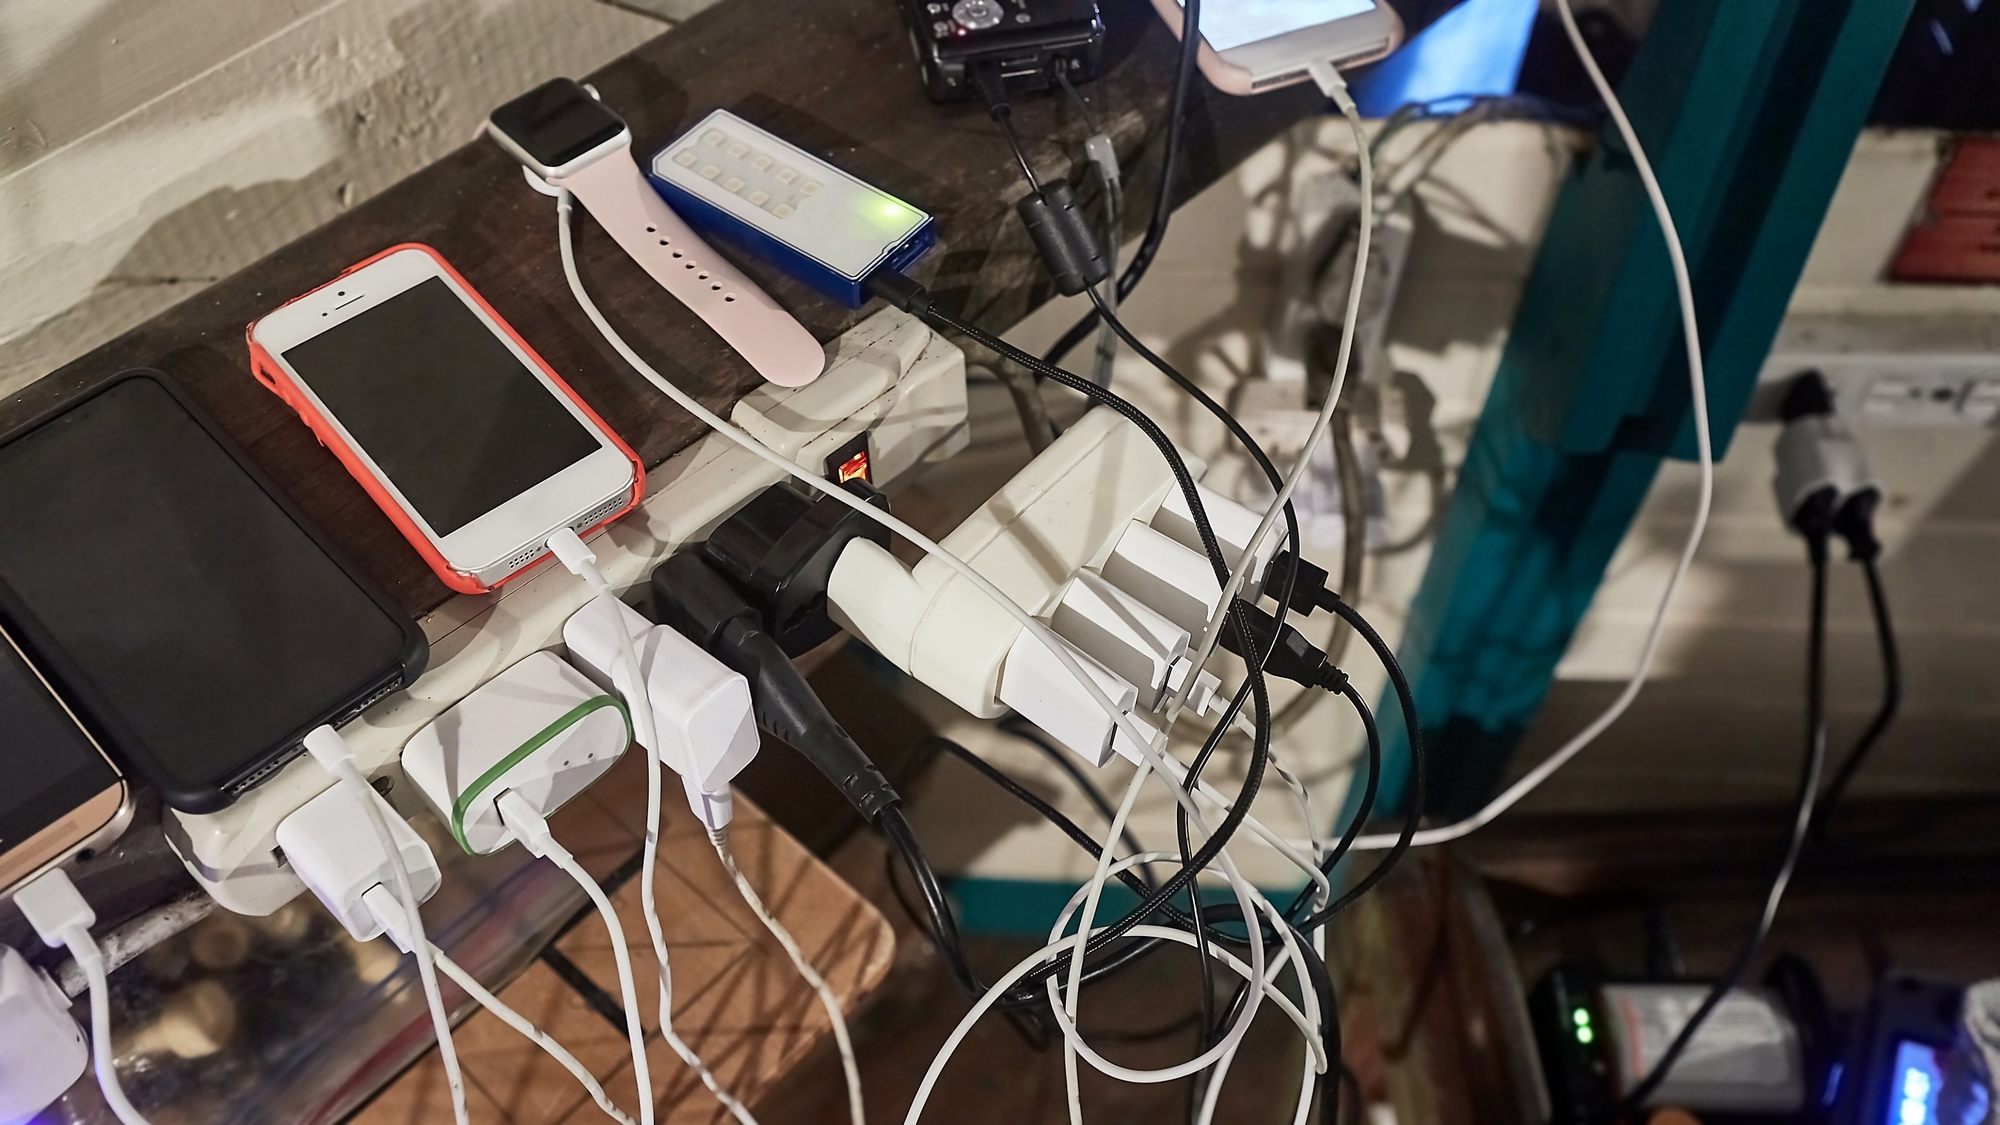 Lots of chargers for devices tangled in a crowded corner